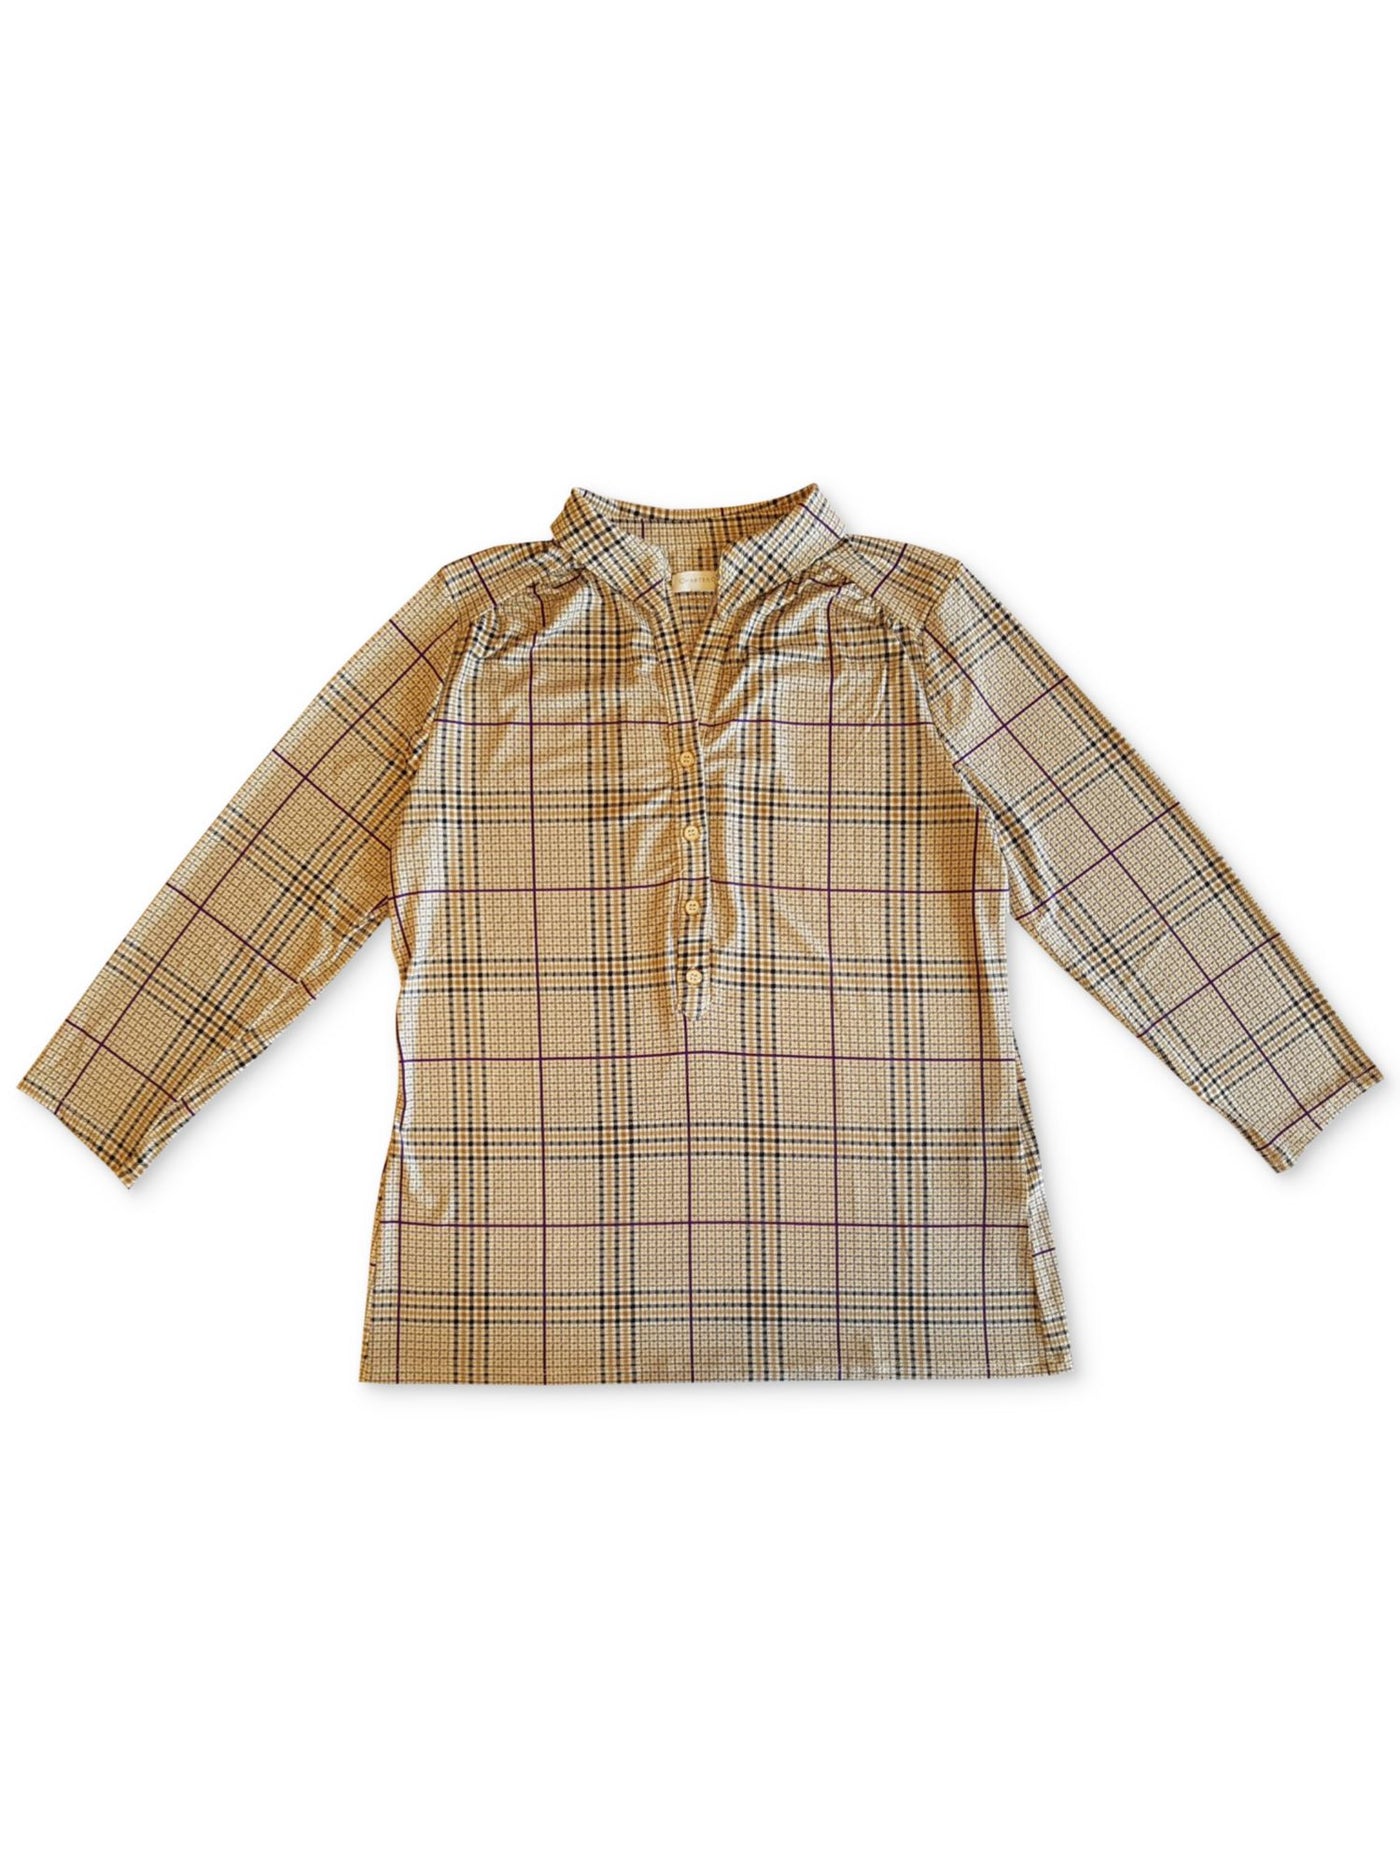 CHARTER CLUB Womens Beige Plaid Long Sleeve Collared Top XS